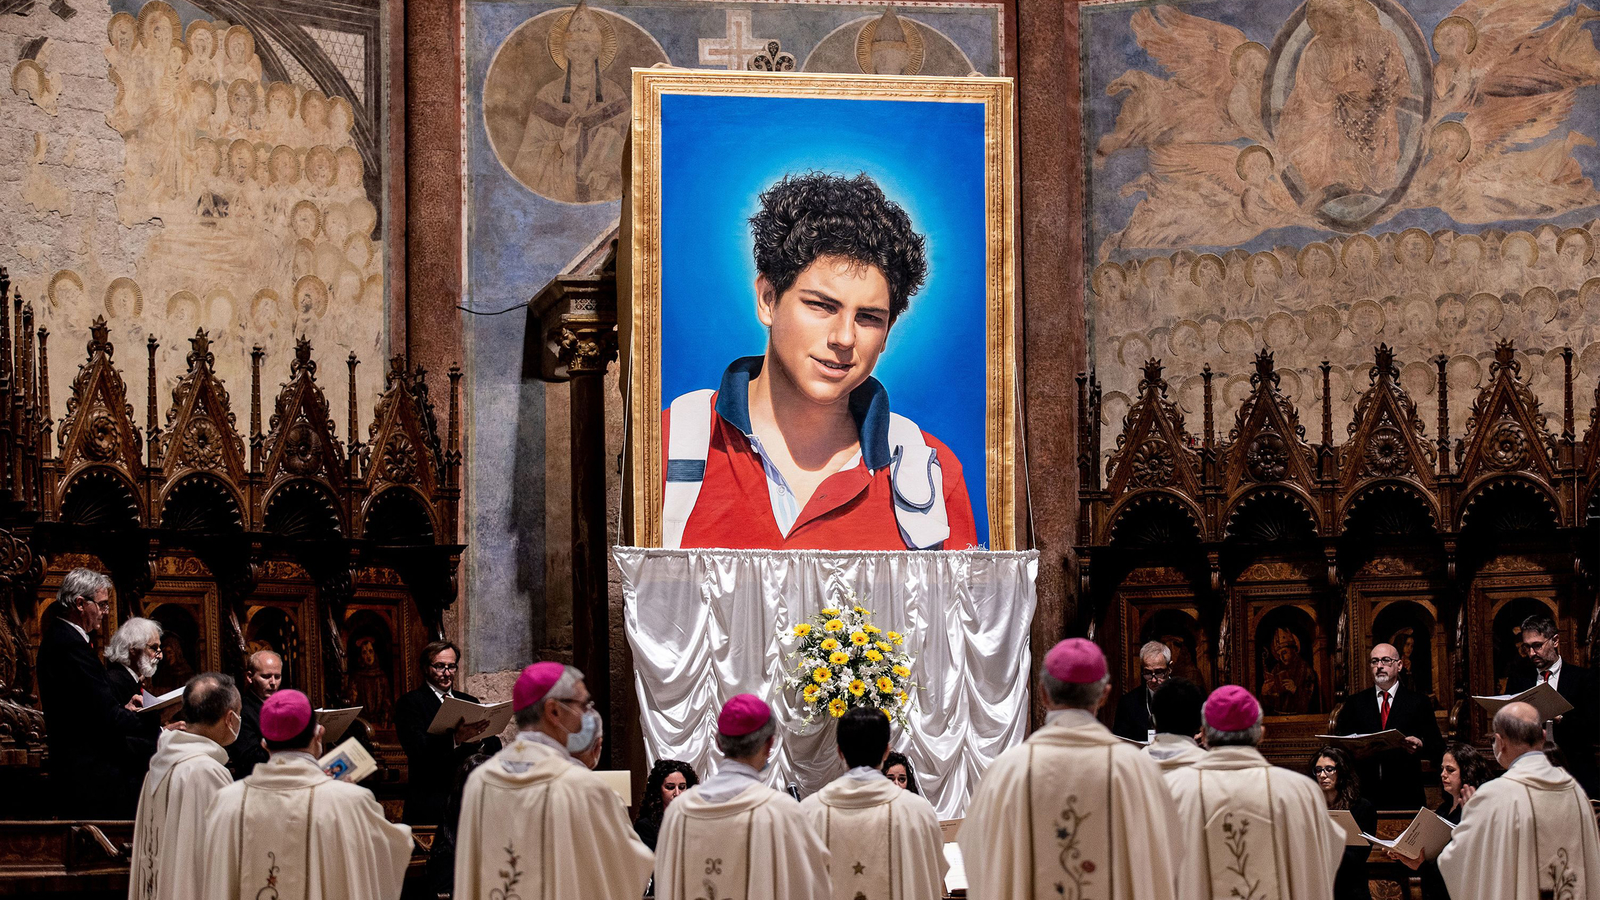 Video-gaming teen to become first Catholic millennial saint as pope and cardinals approve canonization [Video]